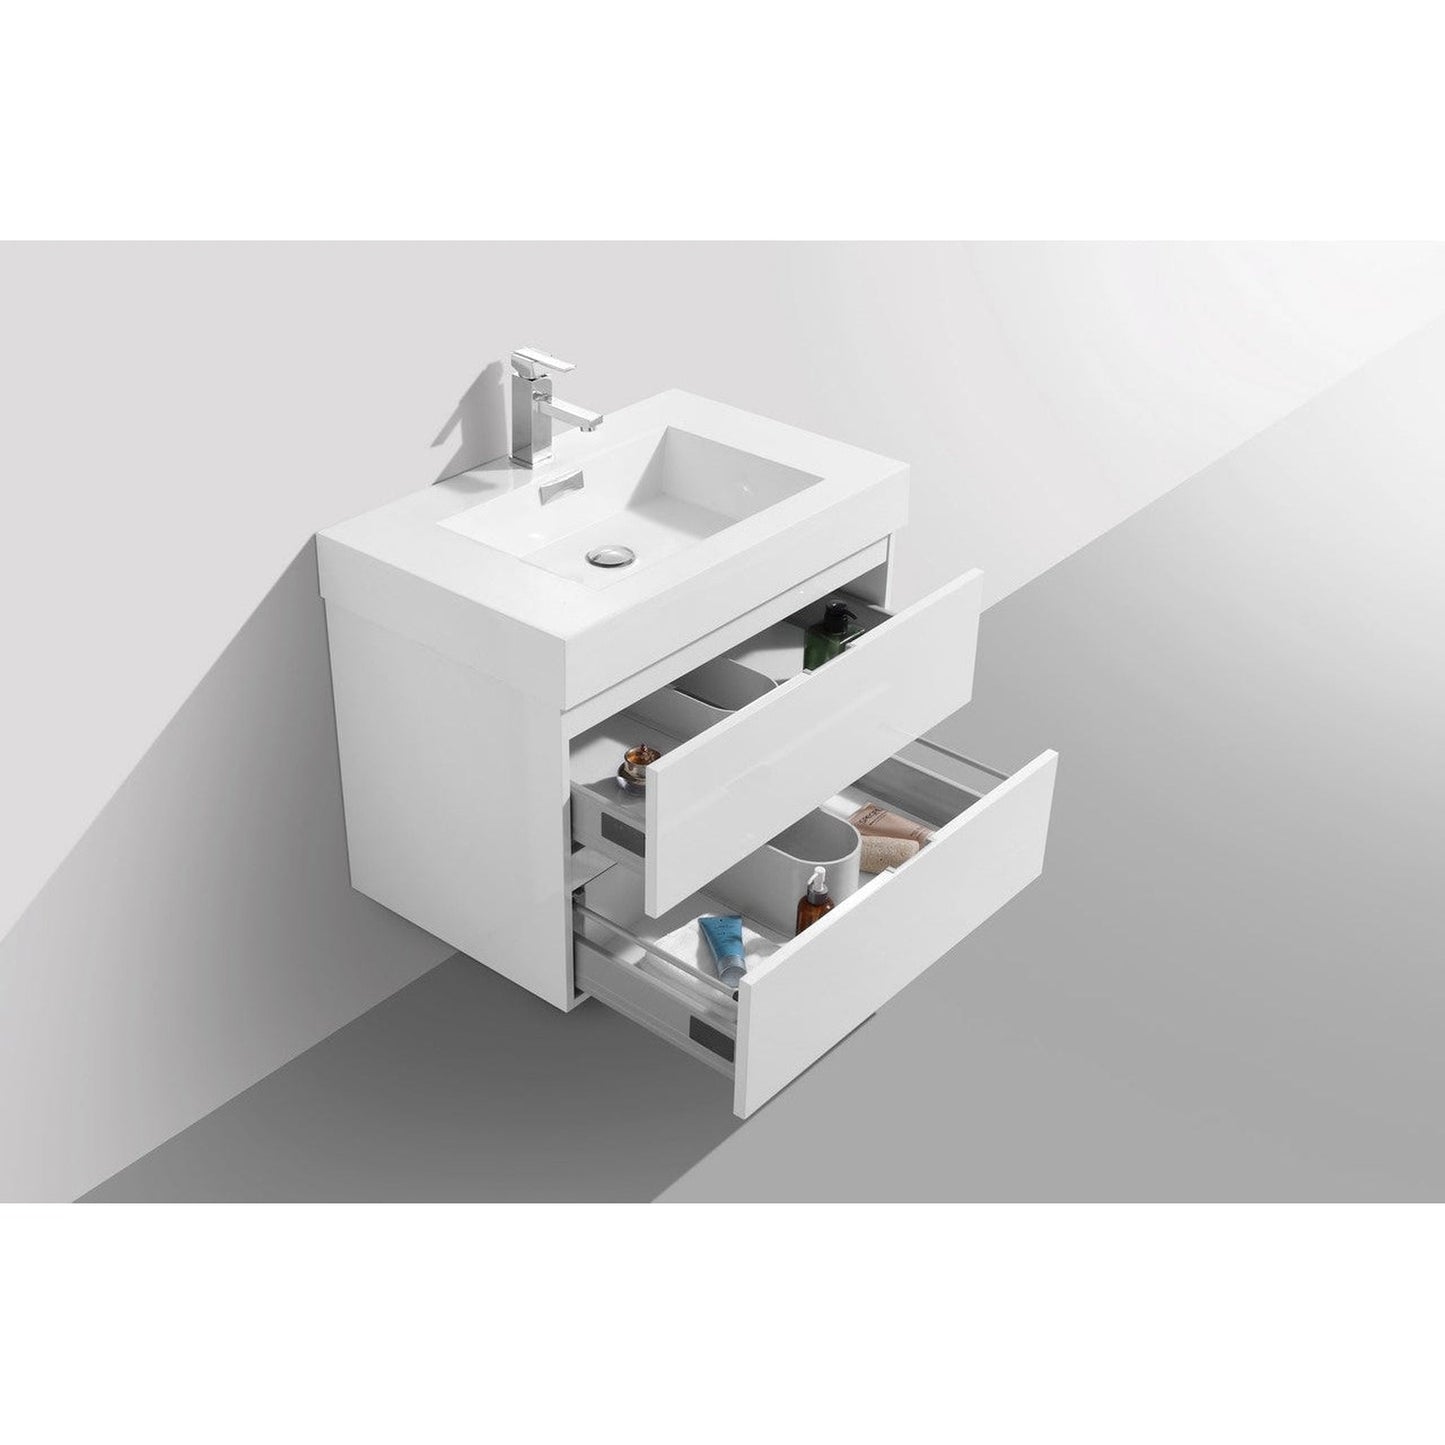 KubeBath Bliss 30" High Gloss White Wall-Mounted Modern Bathroom Vanity With Single Integrated Acrylic Sink With Overflow and 30" White Framed Mirror With Shelf